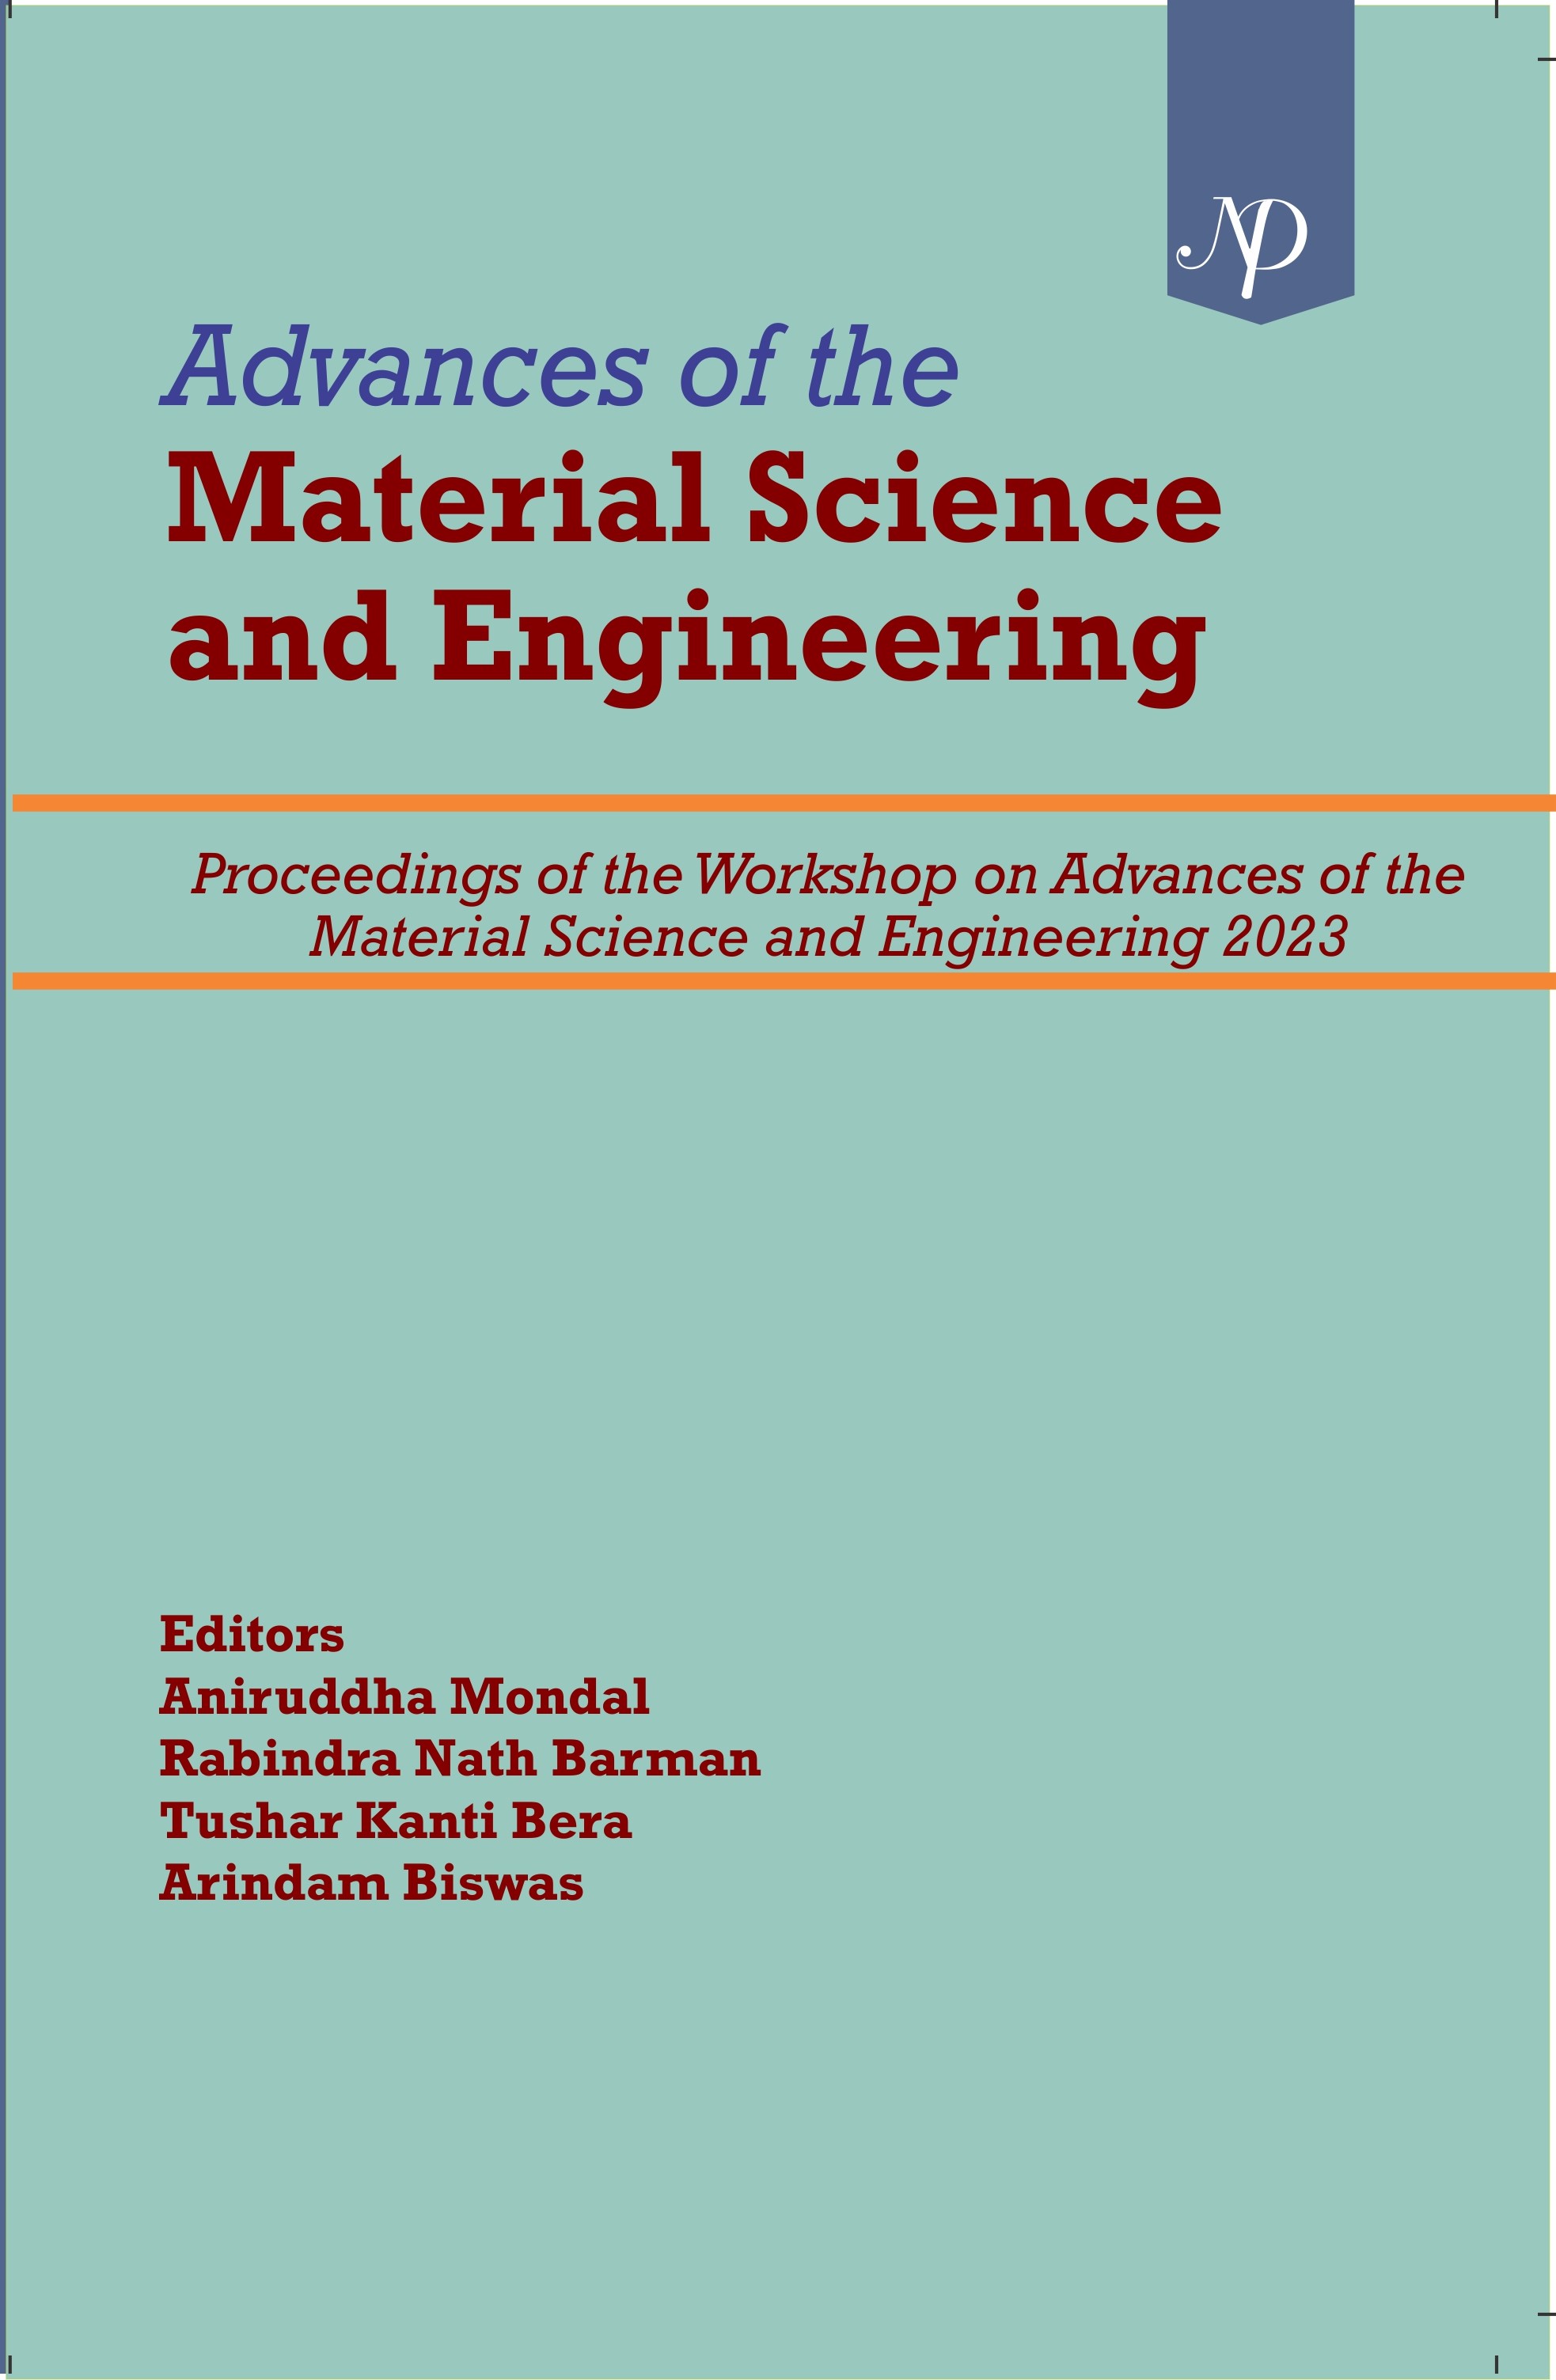 Advances of the Material Science and Engineering (Proceedings of the Workshop on Advances of the Material Science and Engineering 2023)